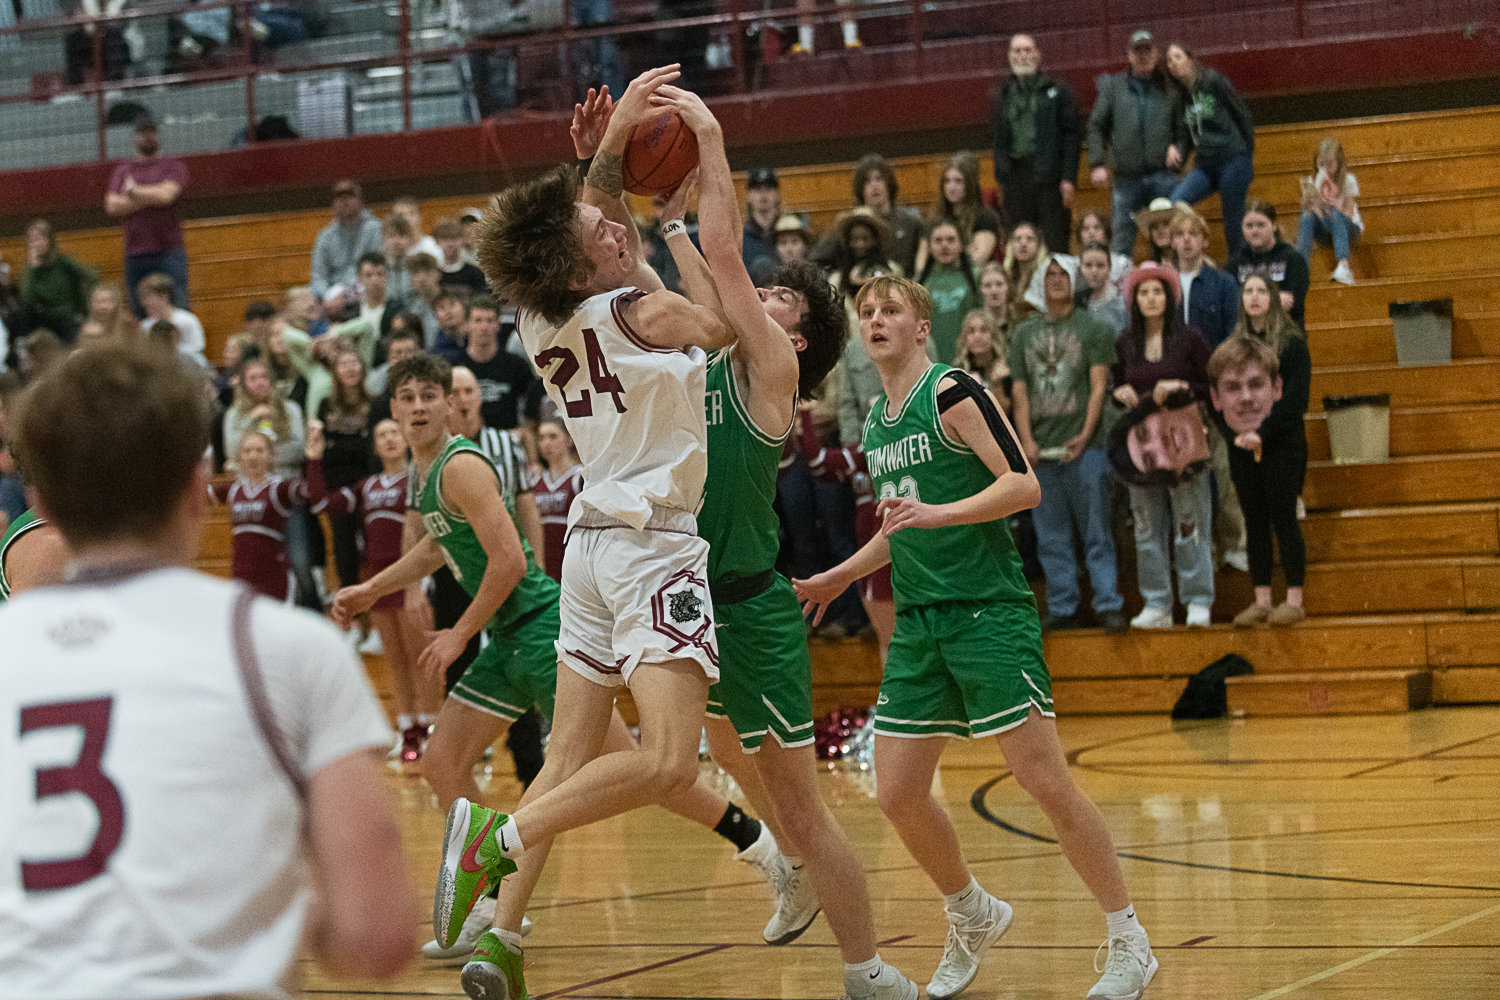 Tyler Klatush draws a lot of contact during the second half of W.F. West's 71-58 loss to Tumwater on Jan. 11.